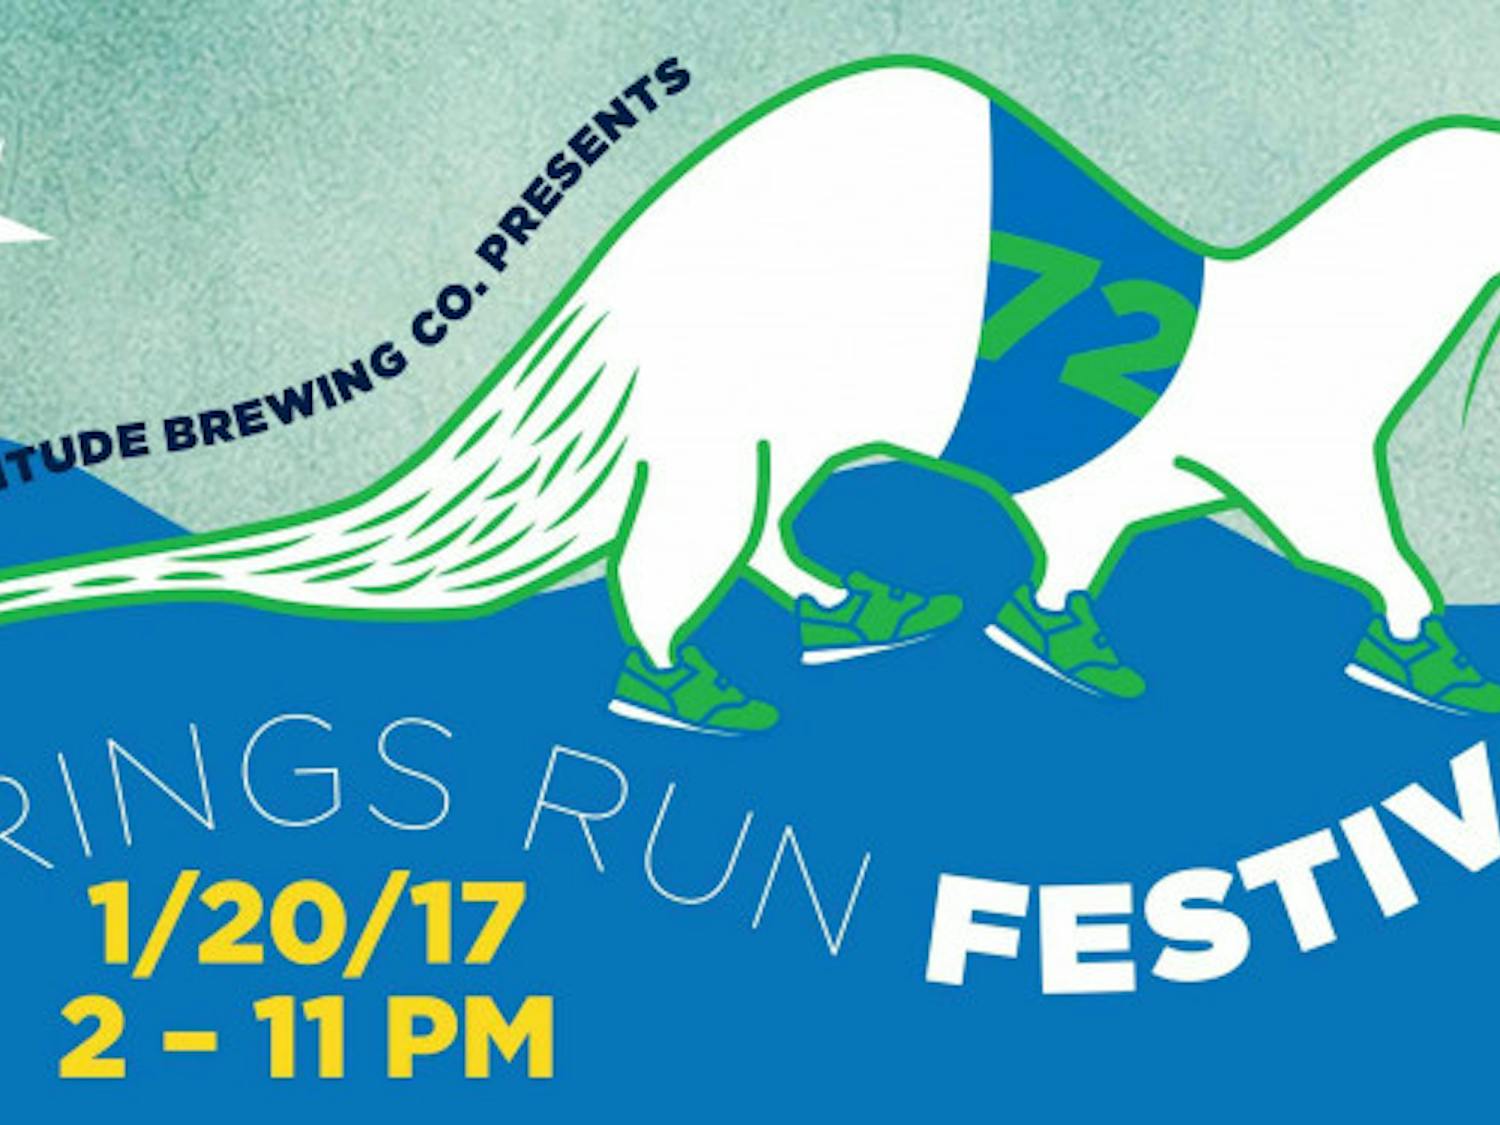 First Magnitude Brewing Company’s popular 7.2K Springs Run, which raises money for springs protection Saturday, will be followed by Springs Fest, a fun day full of activities.